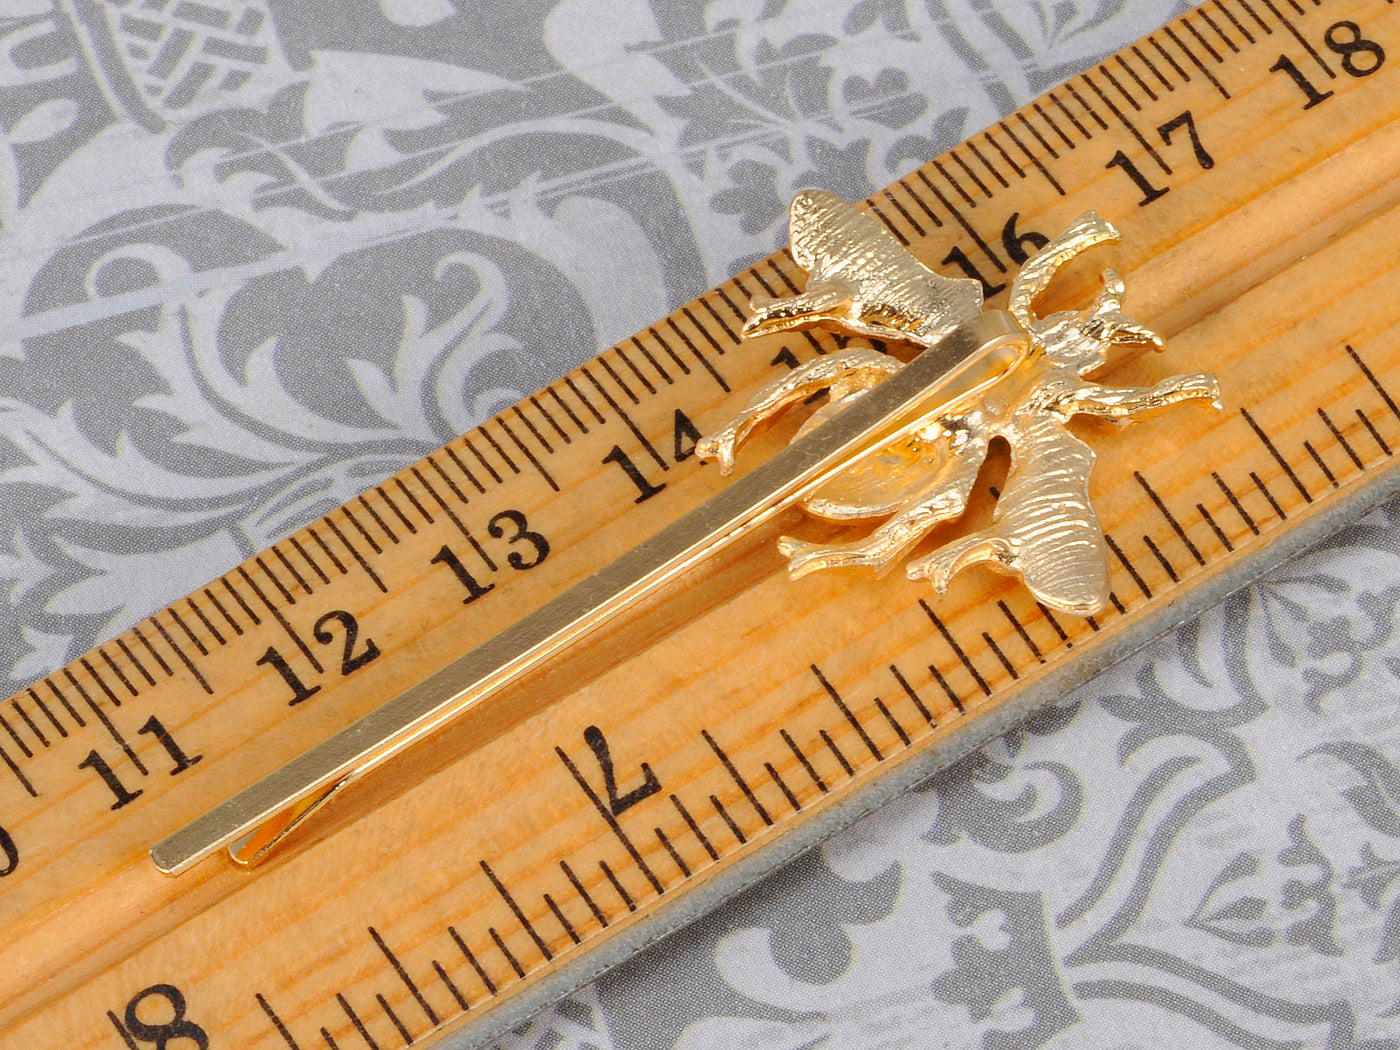 Egyptian Honey Bumble Bee Fly Insect Wings Hair Bobby Pin